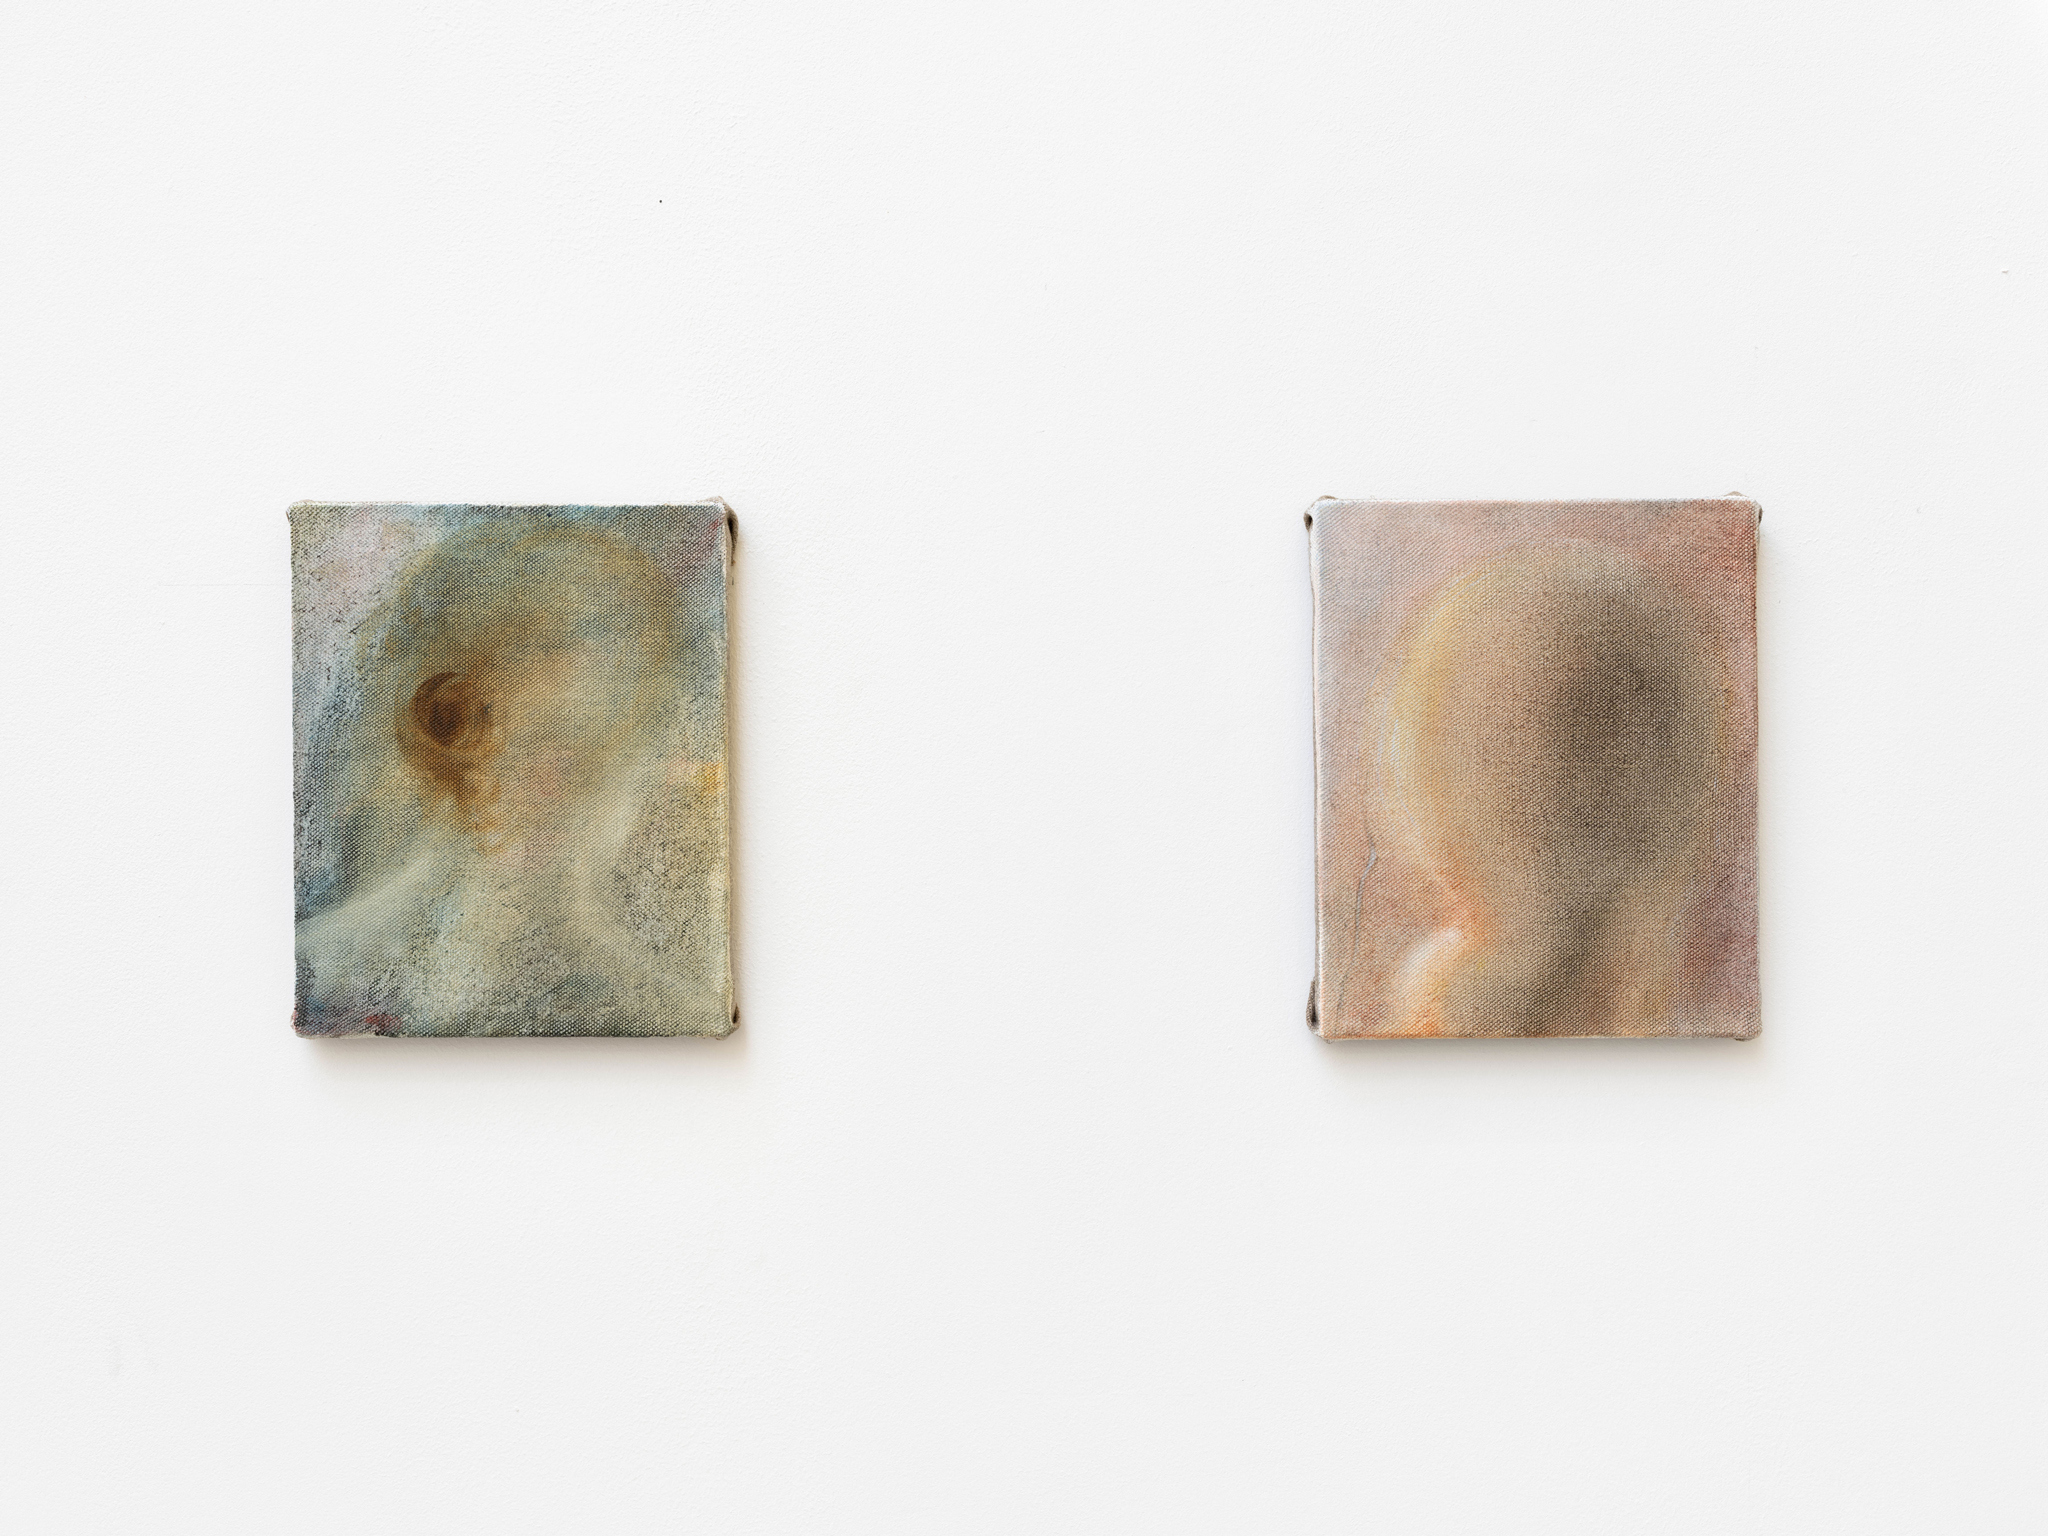 Nino Kapanadze, These fragments I have shored against my ruins (I) & (II), 2023, Oil on linen, 27 × 22 cm. Courtesy of the artist and Crèvecœur, Paris. Photo: Martin Argyroglo.